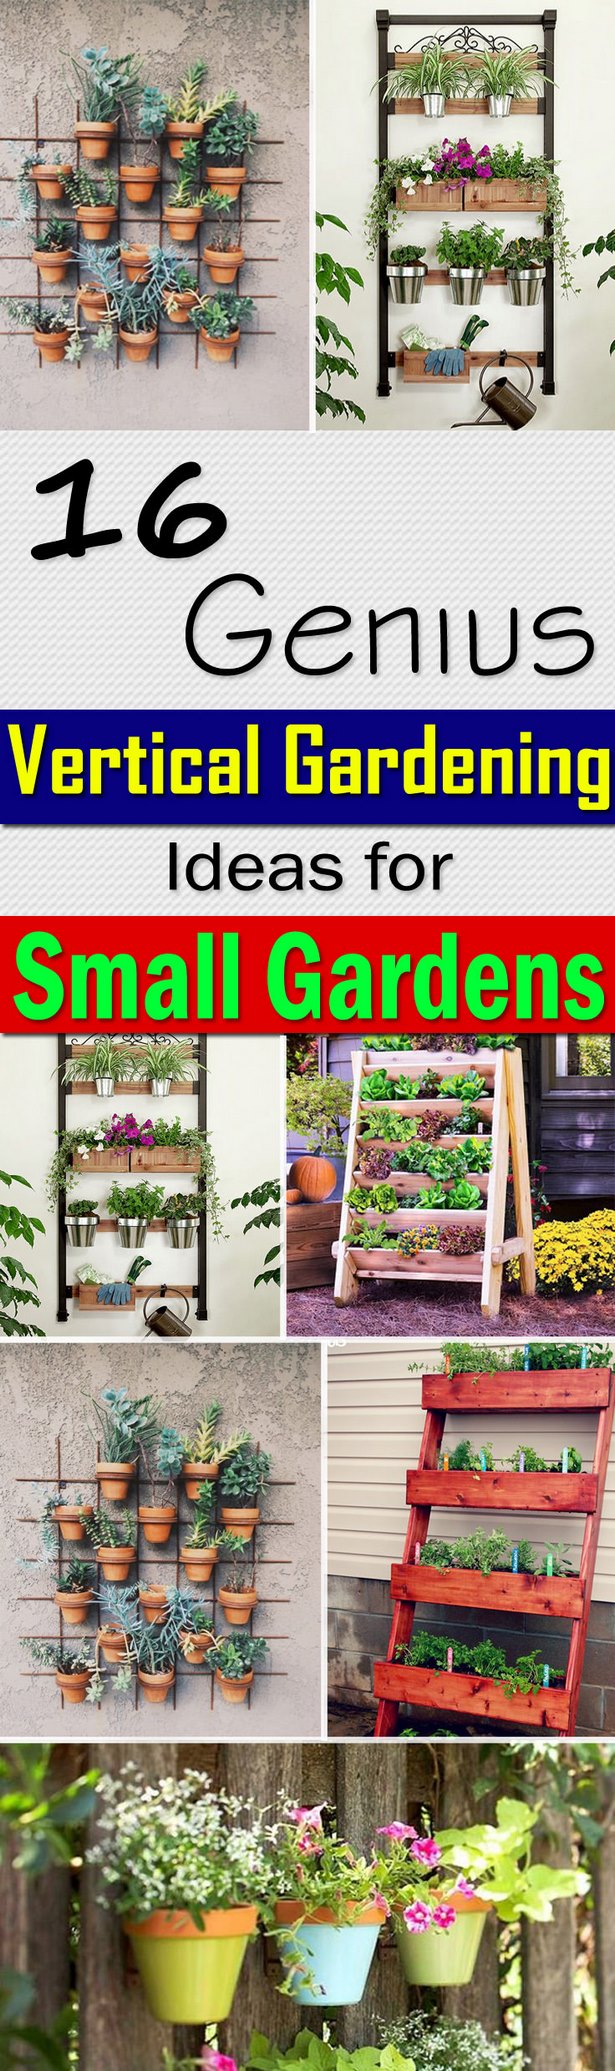 ideas-to-plant-in-small-gardens-85_18 Идеи за засаждане в малки градини